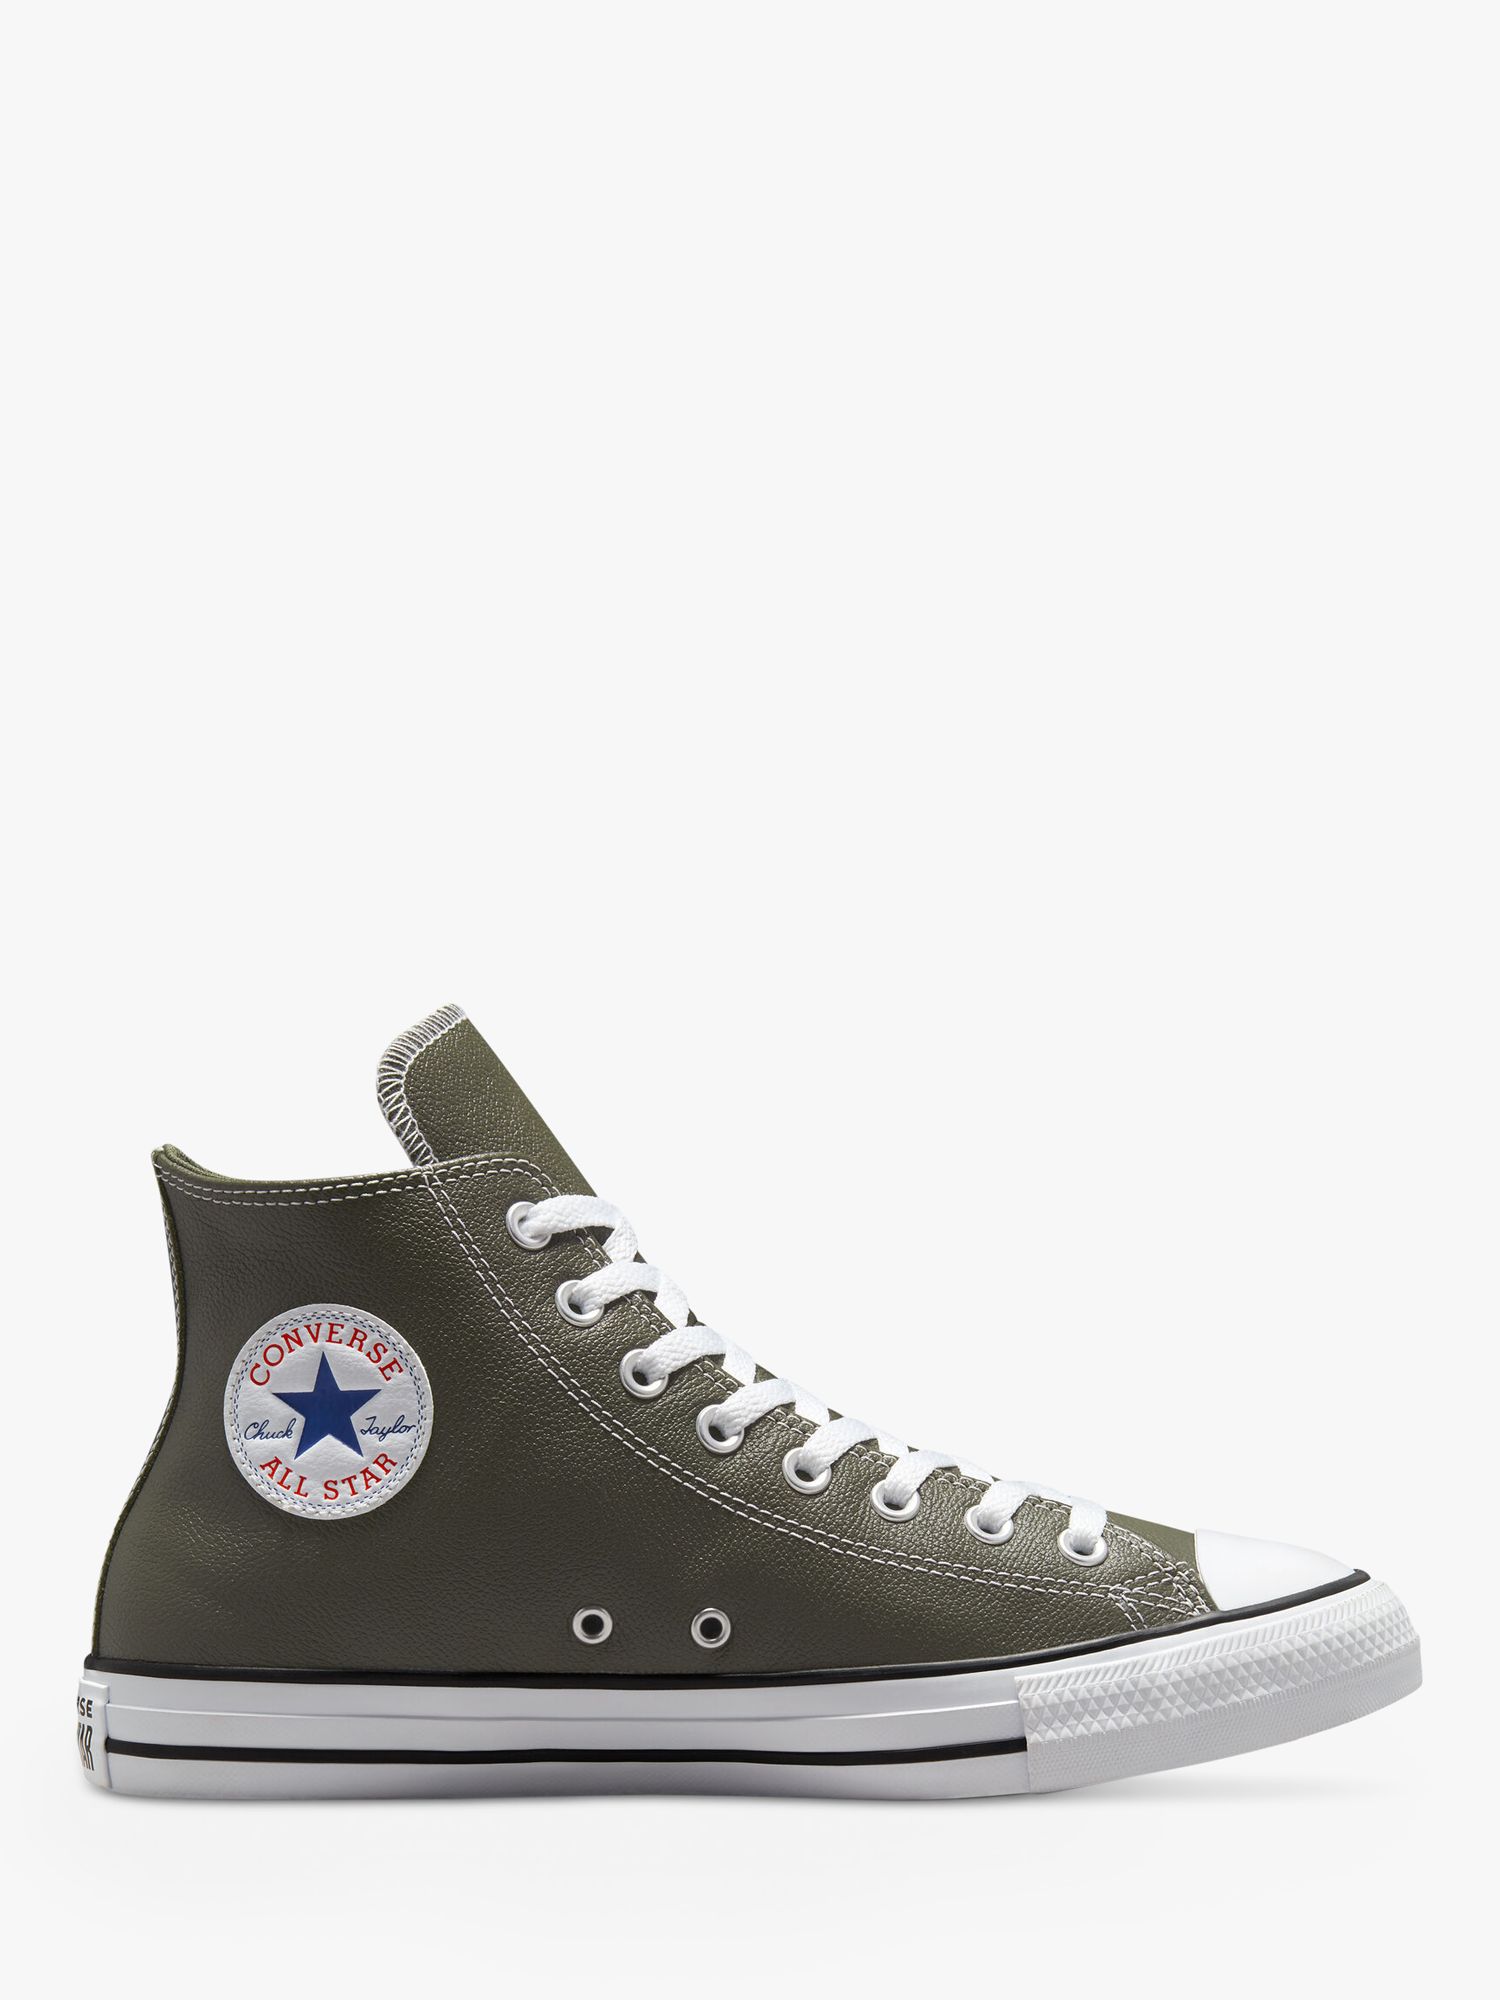 Converse All Star Leather Hi-Top Trainers, Cargo Khaki at John Lewis ...